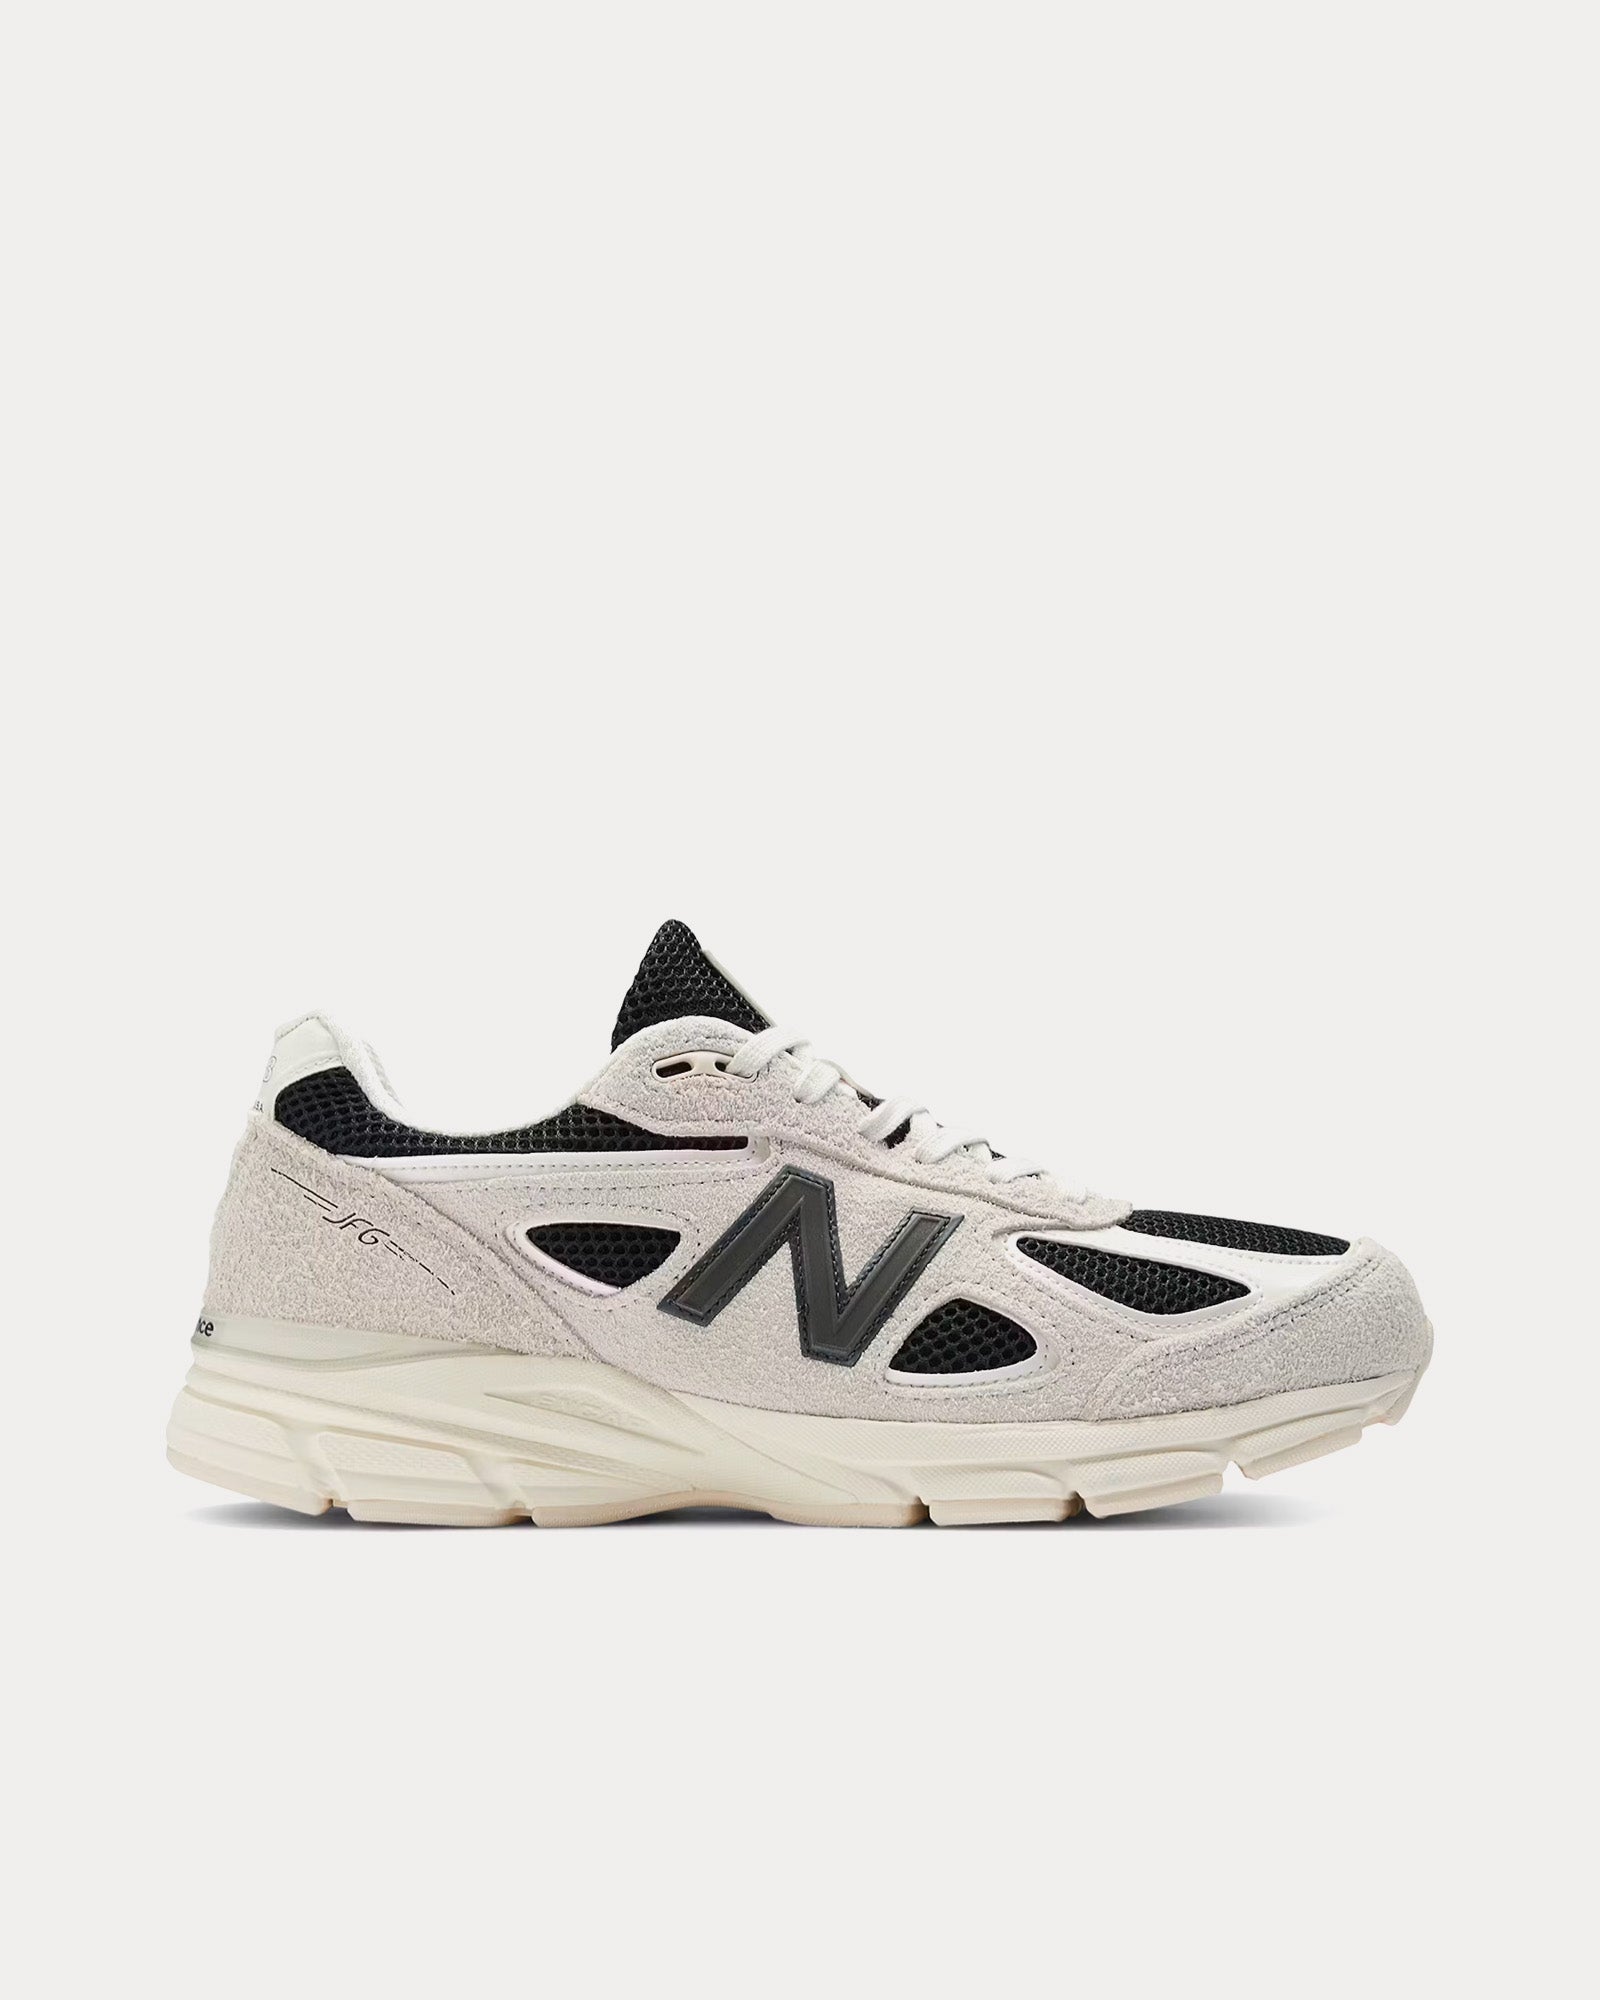 New Balance x Joe Freshgoods - Made in USA 990v4 'Intro' White / Black Low Top Sneakers